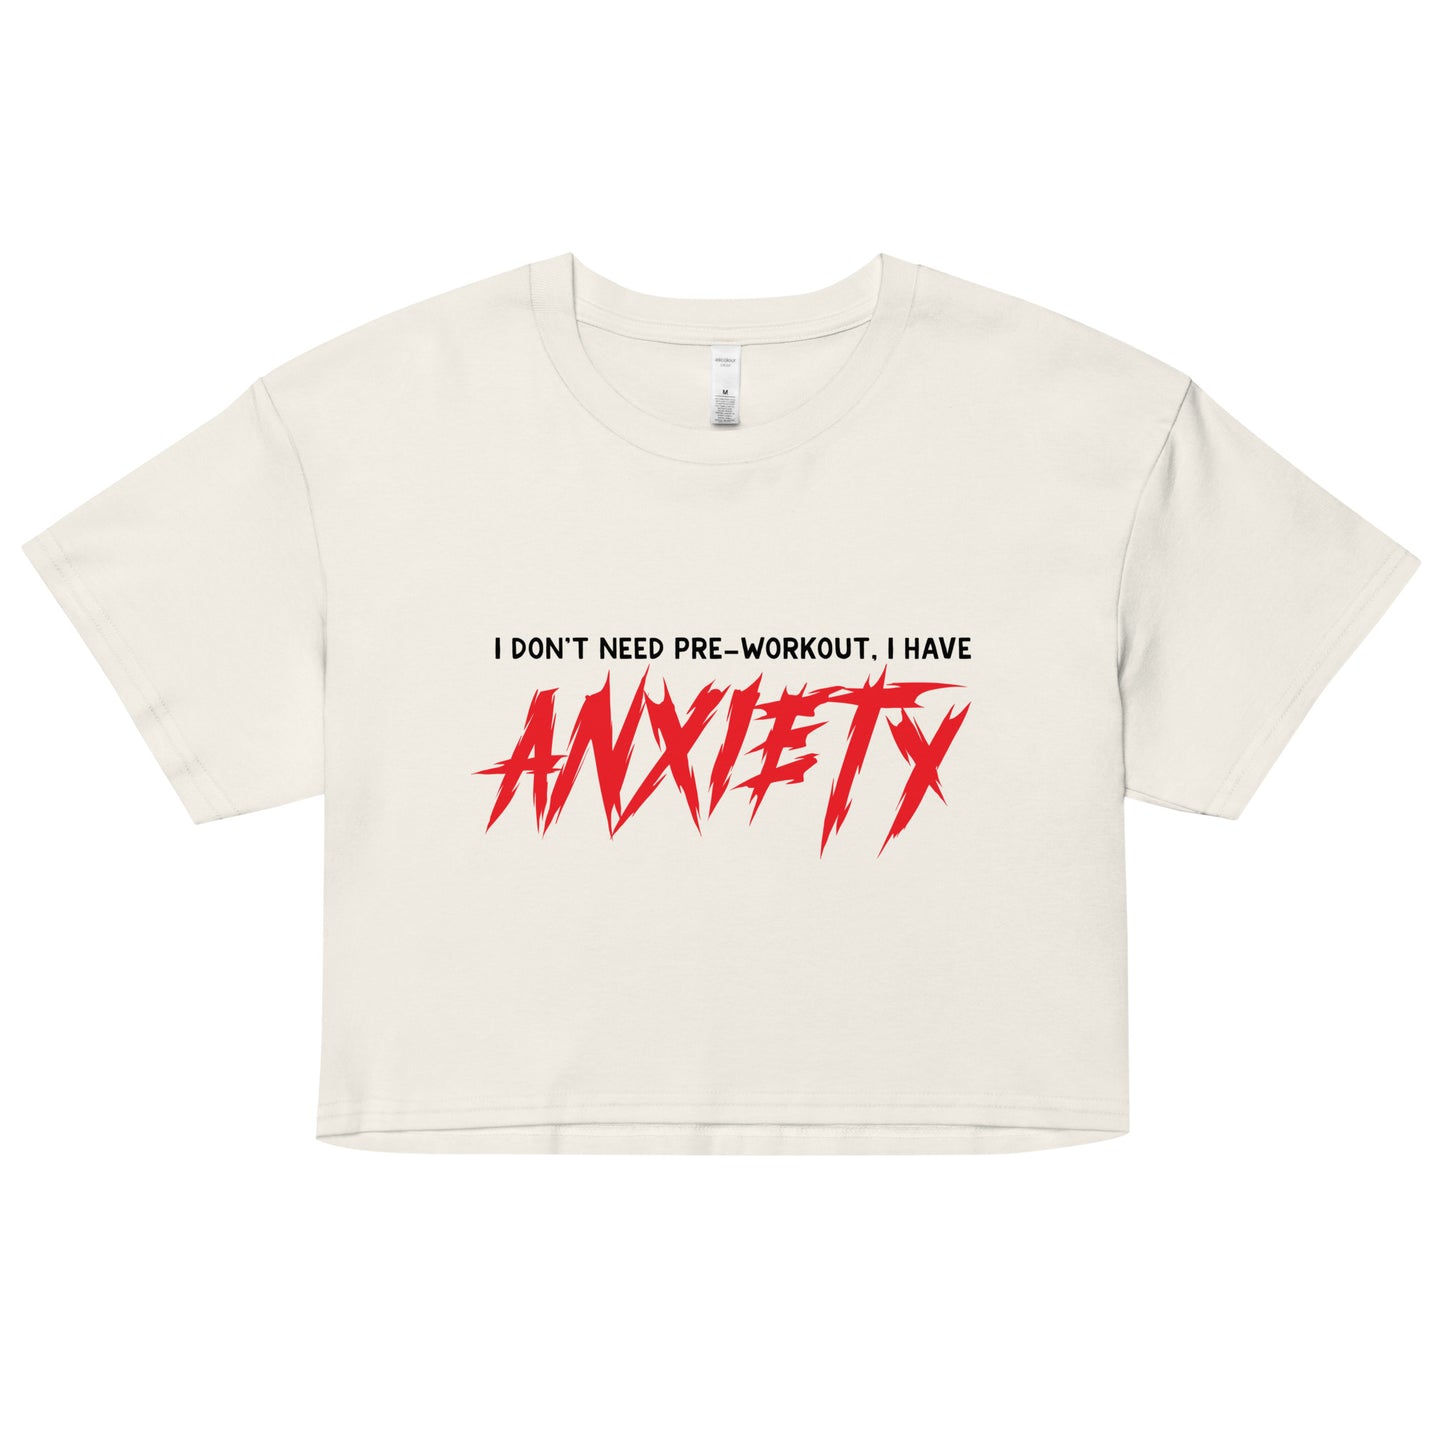 I Don't Need Pre-Workout I Have Anxiety Women’s crop top